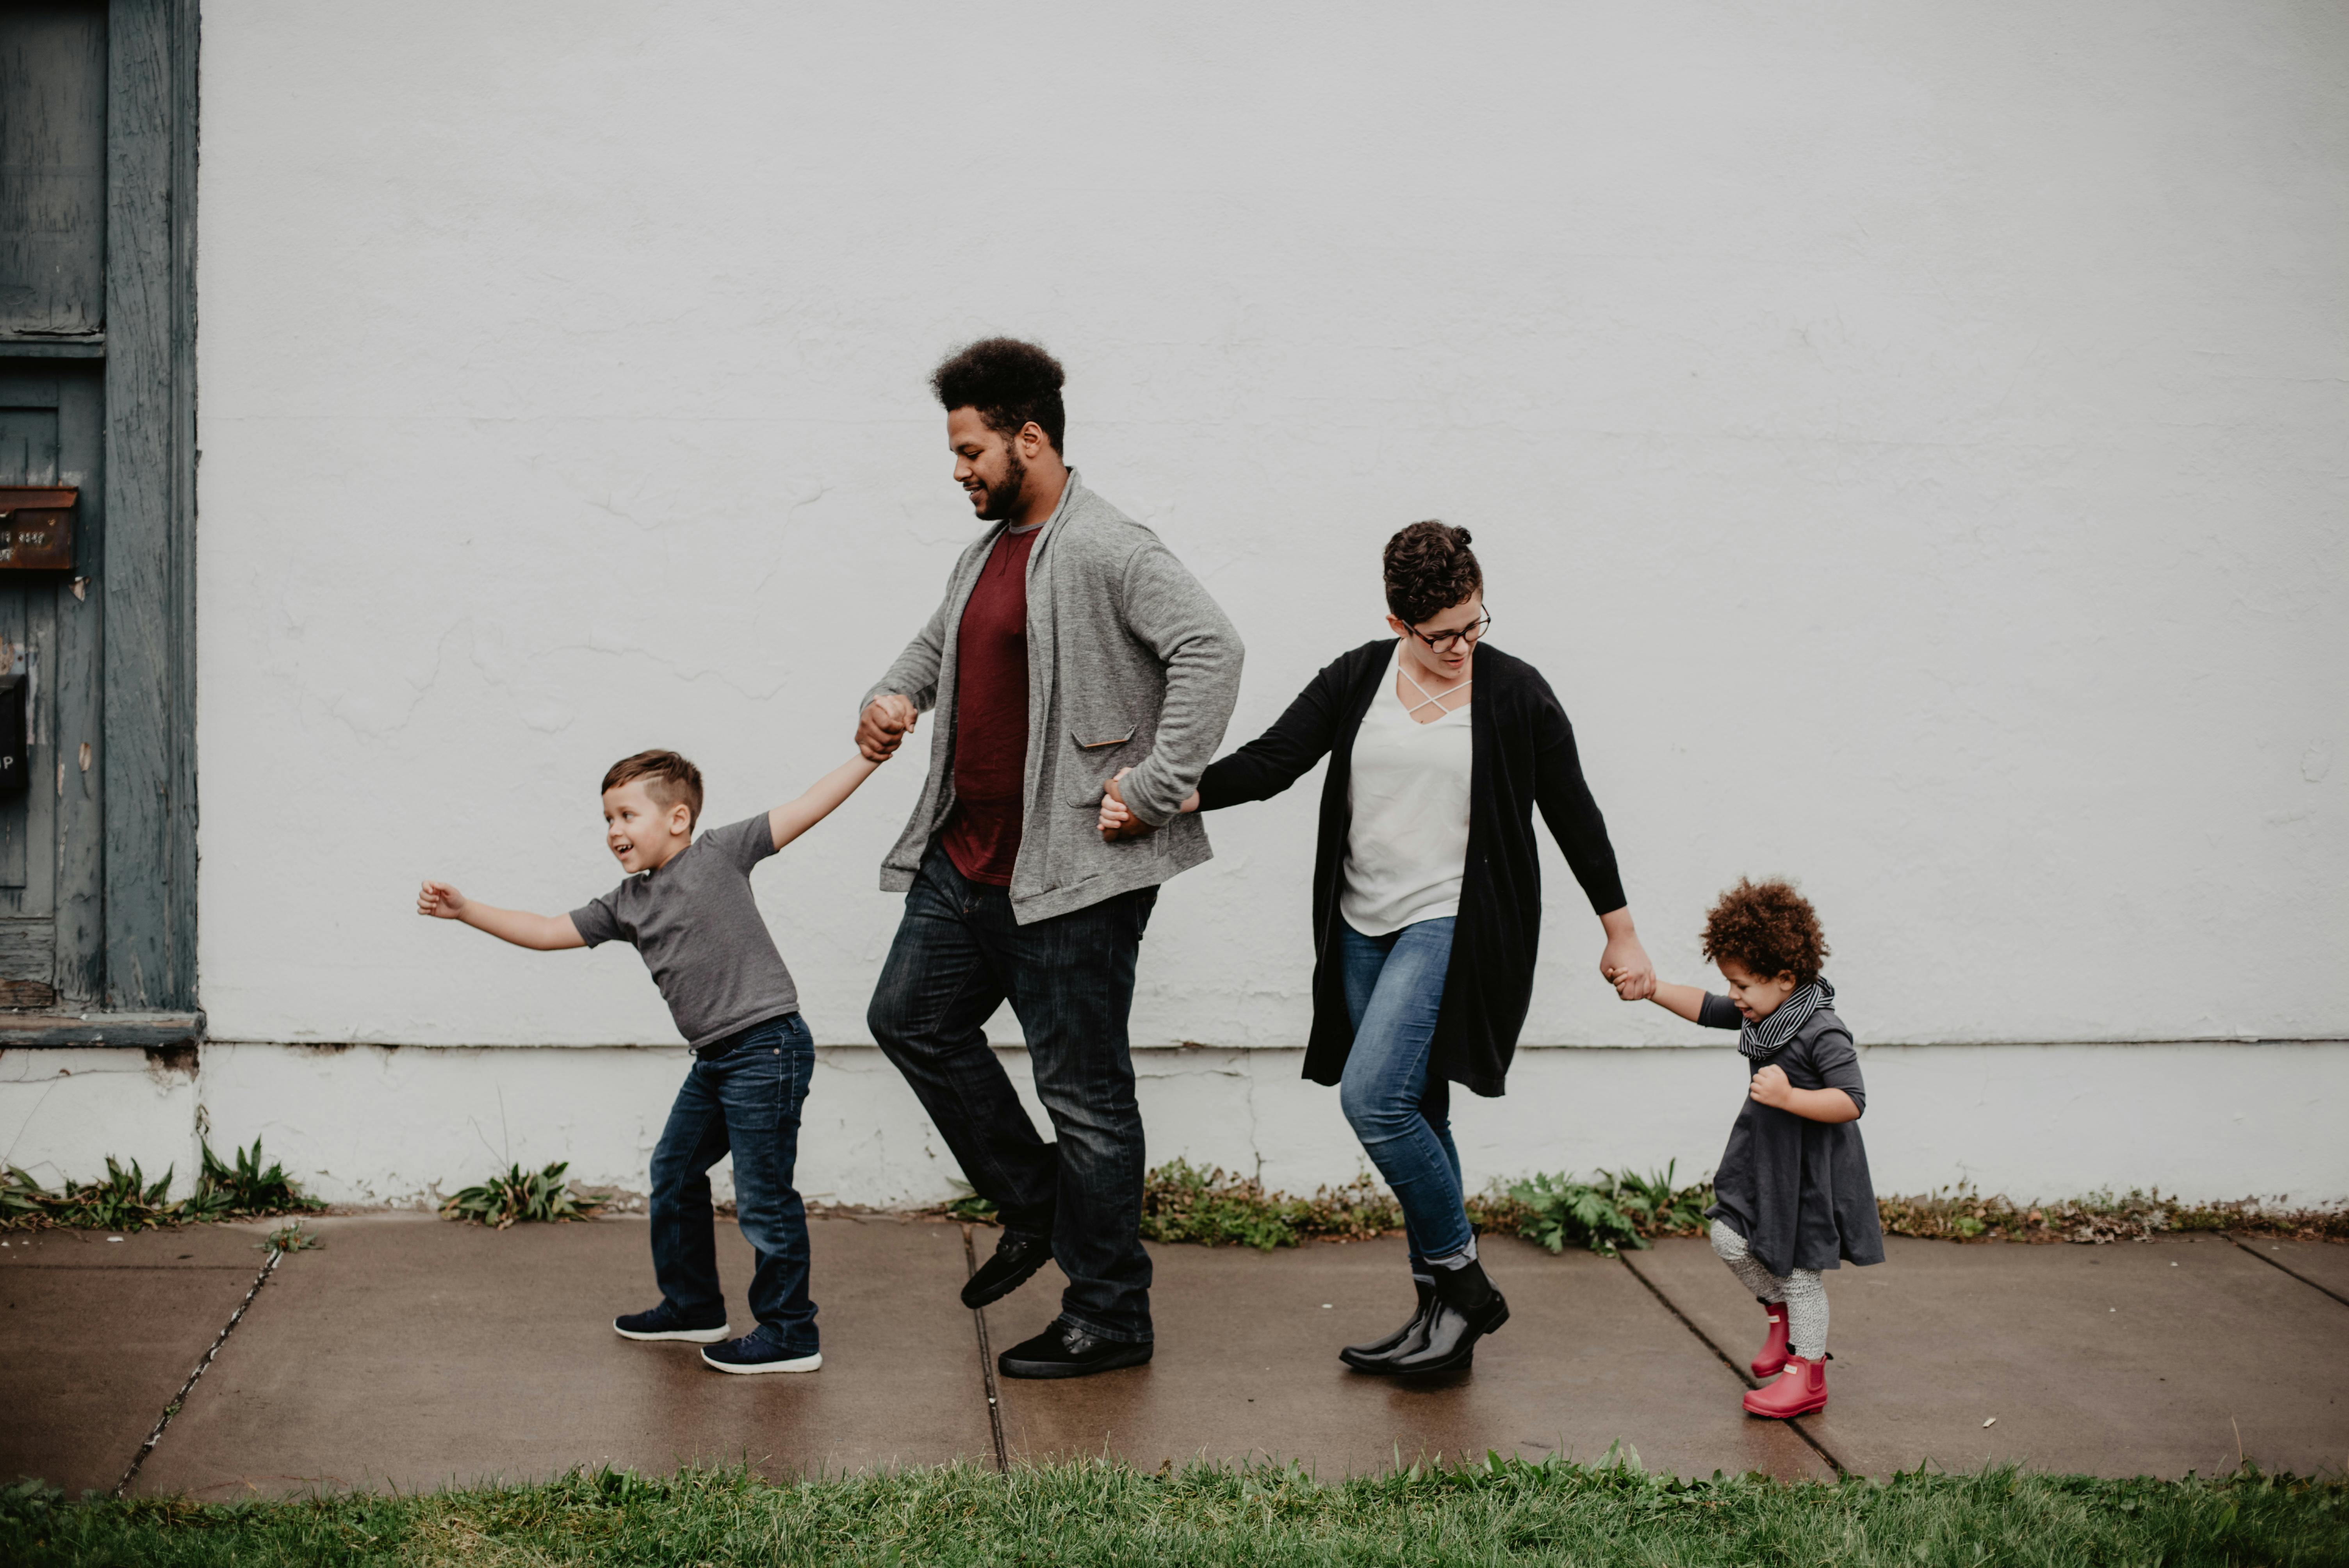 Two children, a man, and woman having fun together outside | Source: Pexels